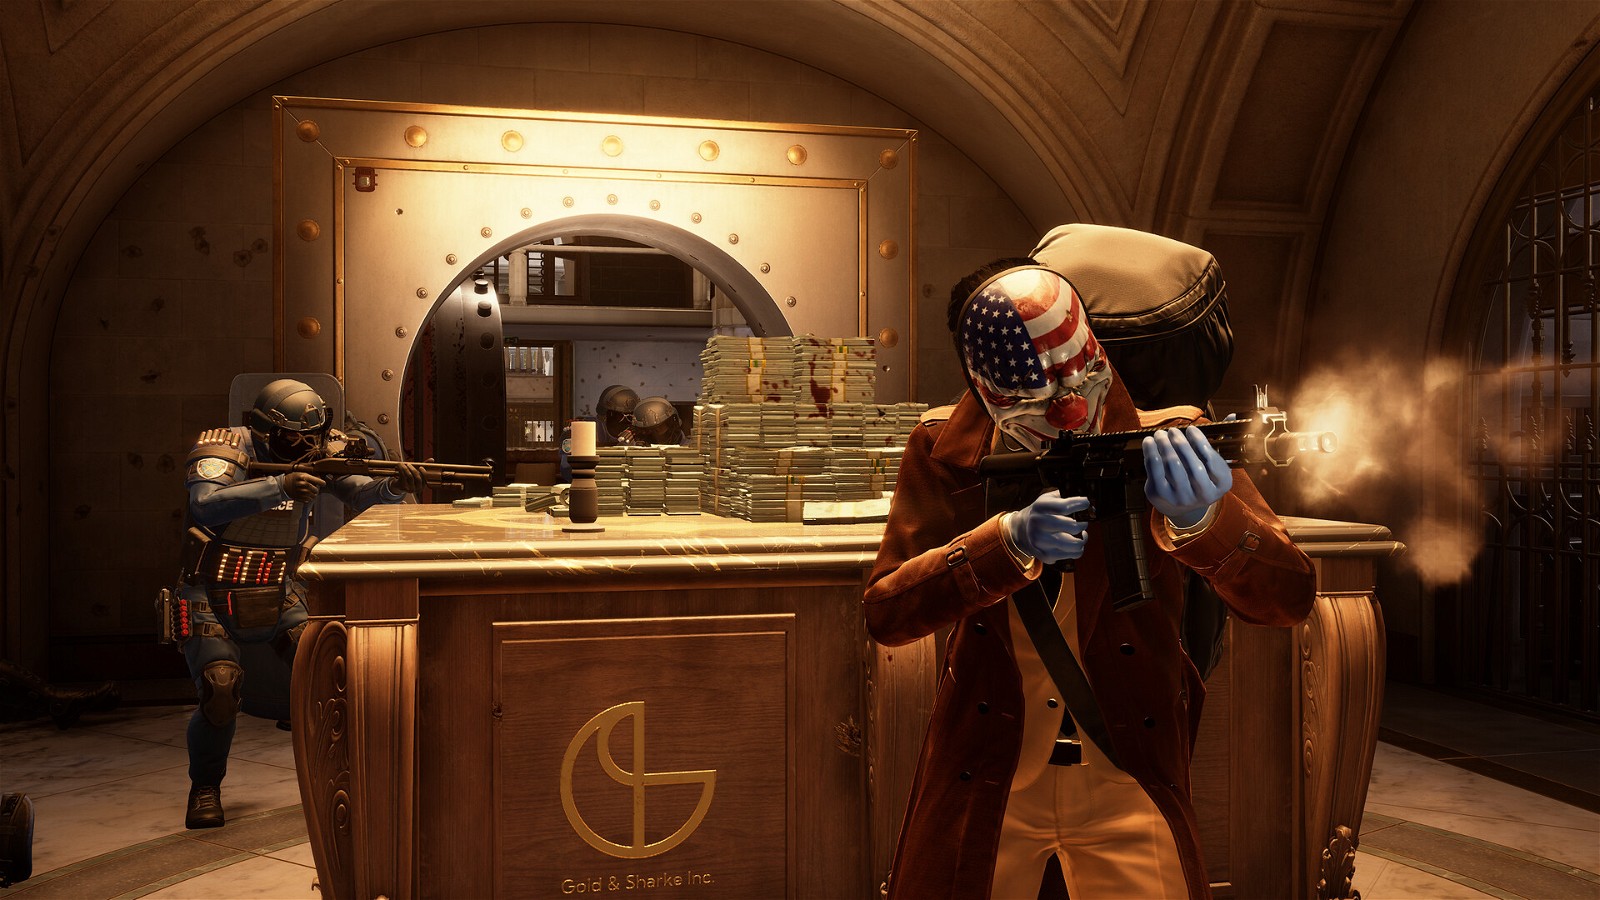 Payday 3 tips to help you become the ultimate crime boss.